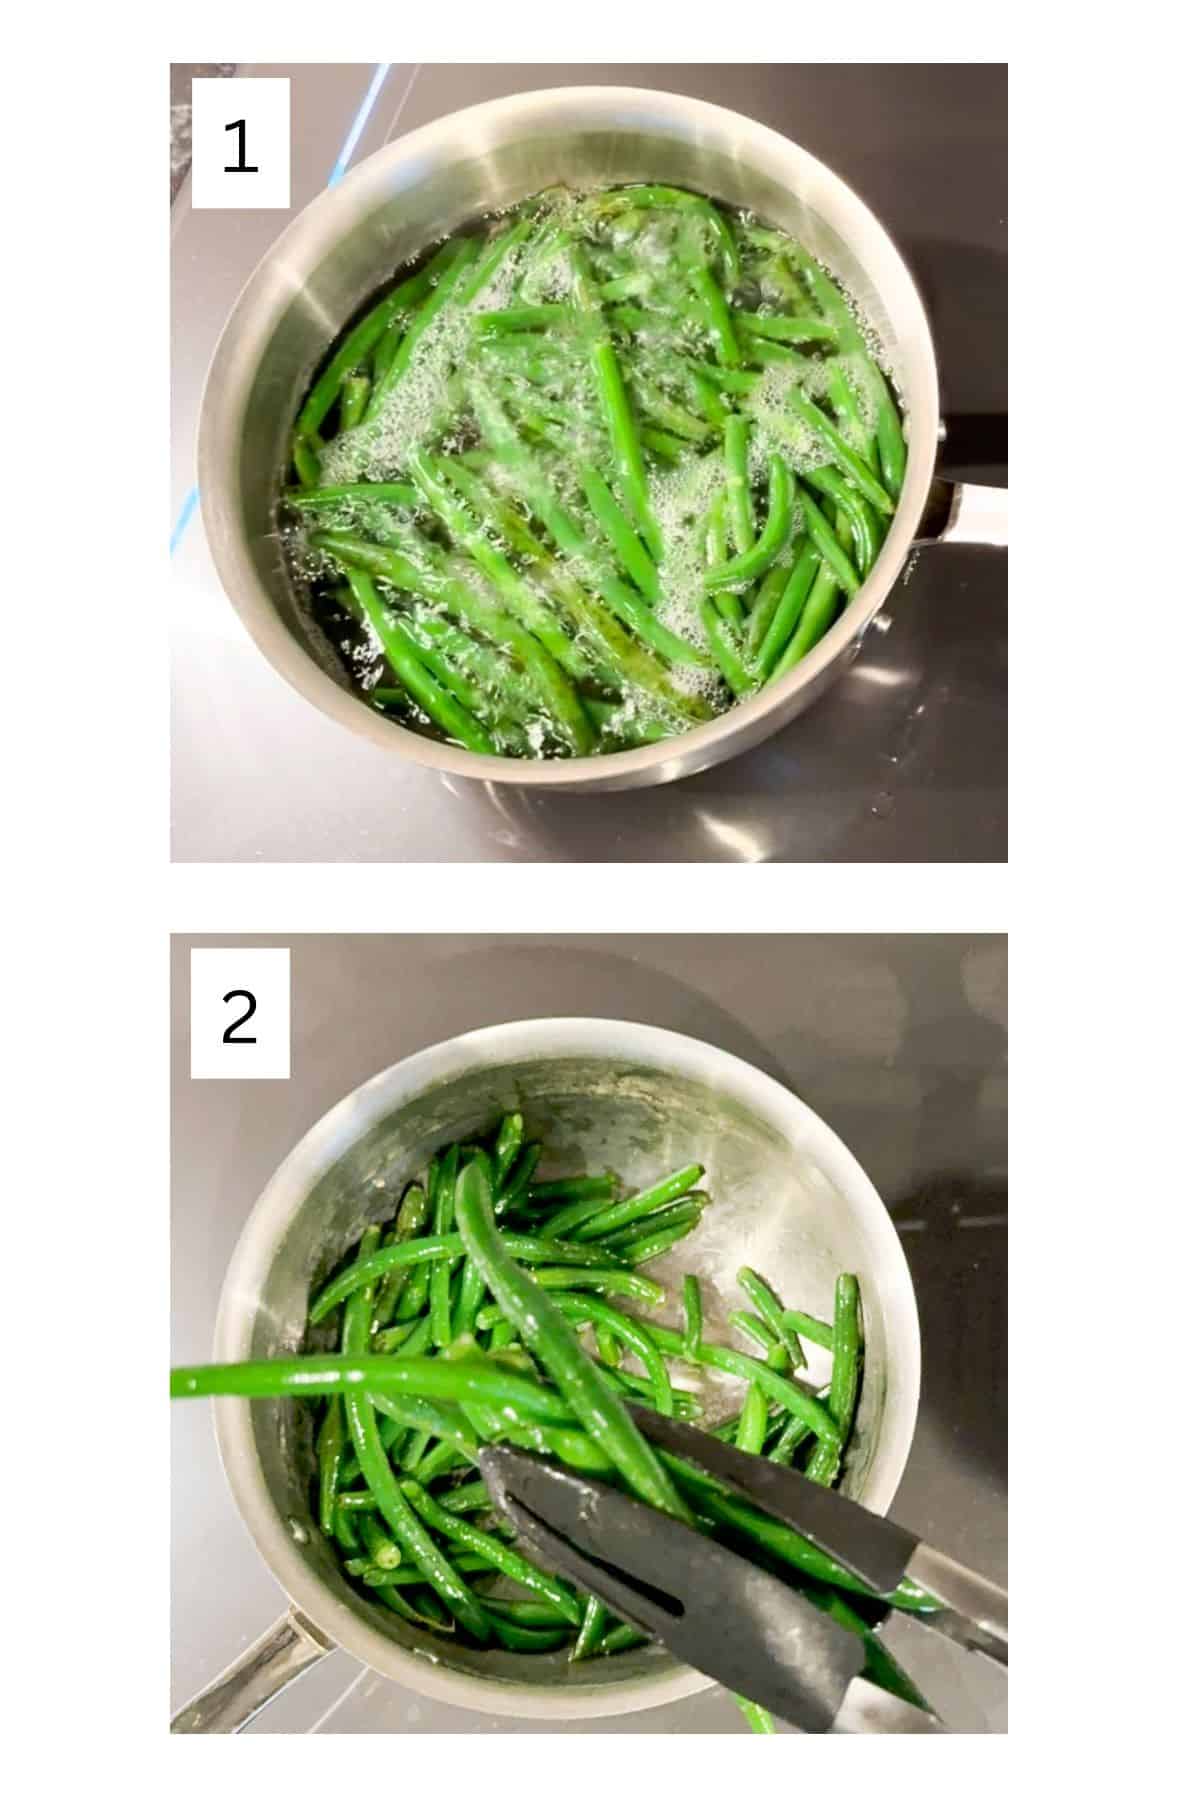 Two process images showing how to make sauteed green beans by blanching them first.